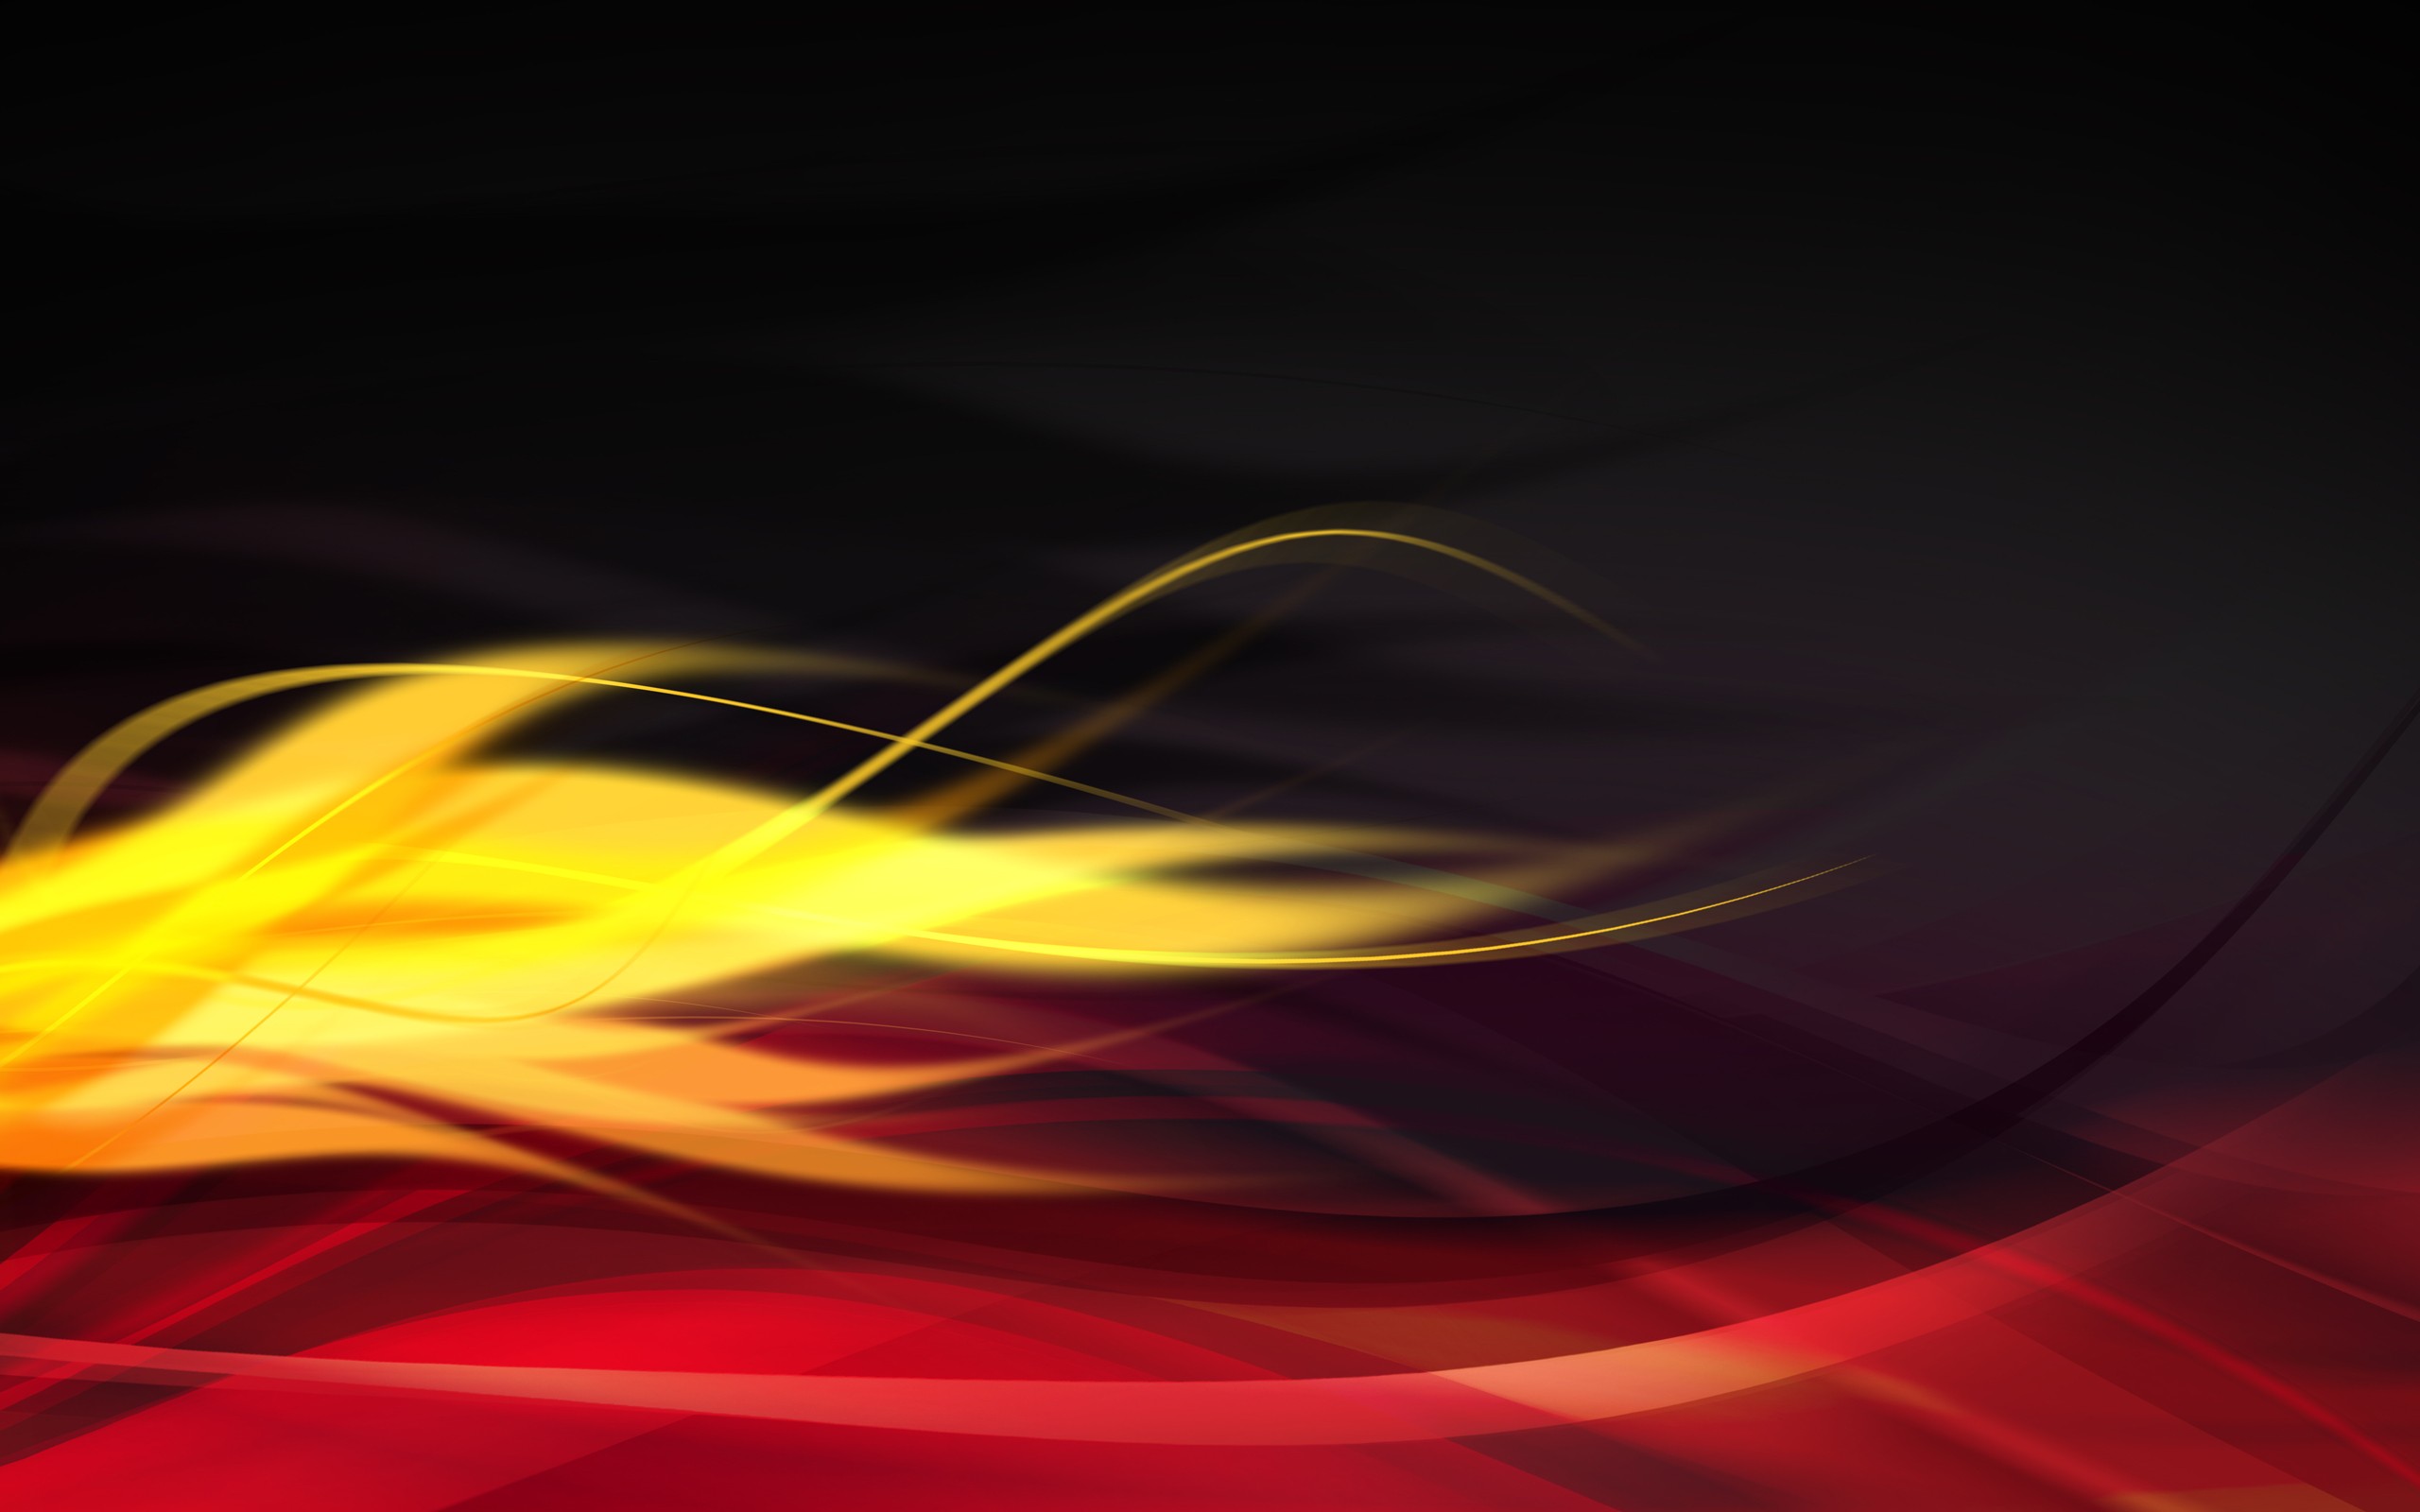 Abstract Red Yellow Graphics Wallpaper,HD Abstract Wallpapers,4k Wallpapers,Images,Backgrounds